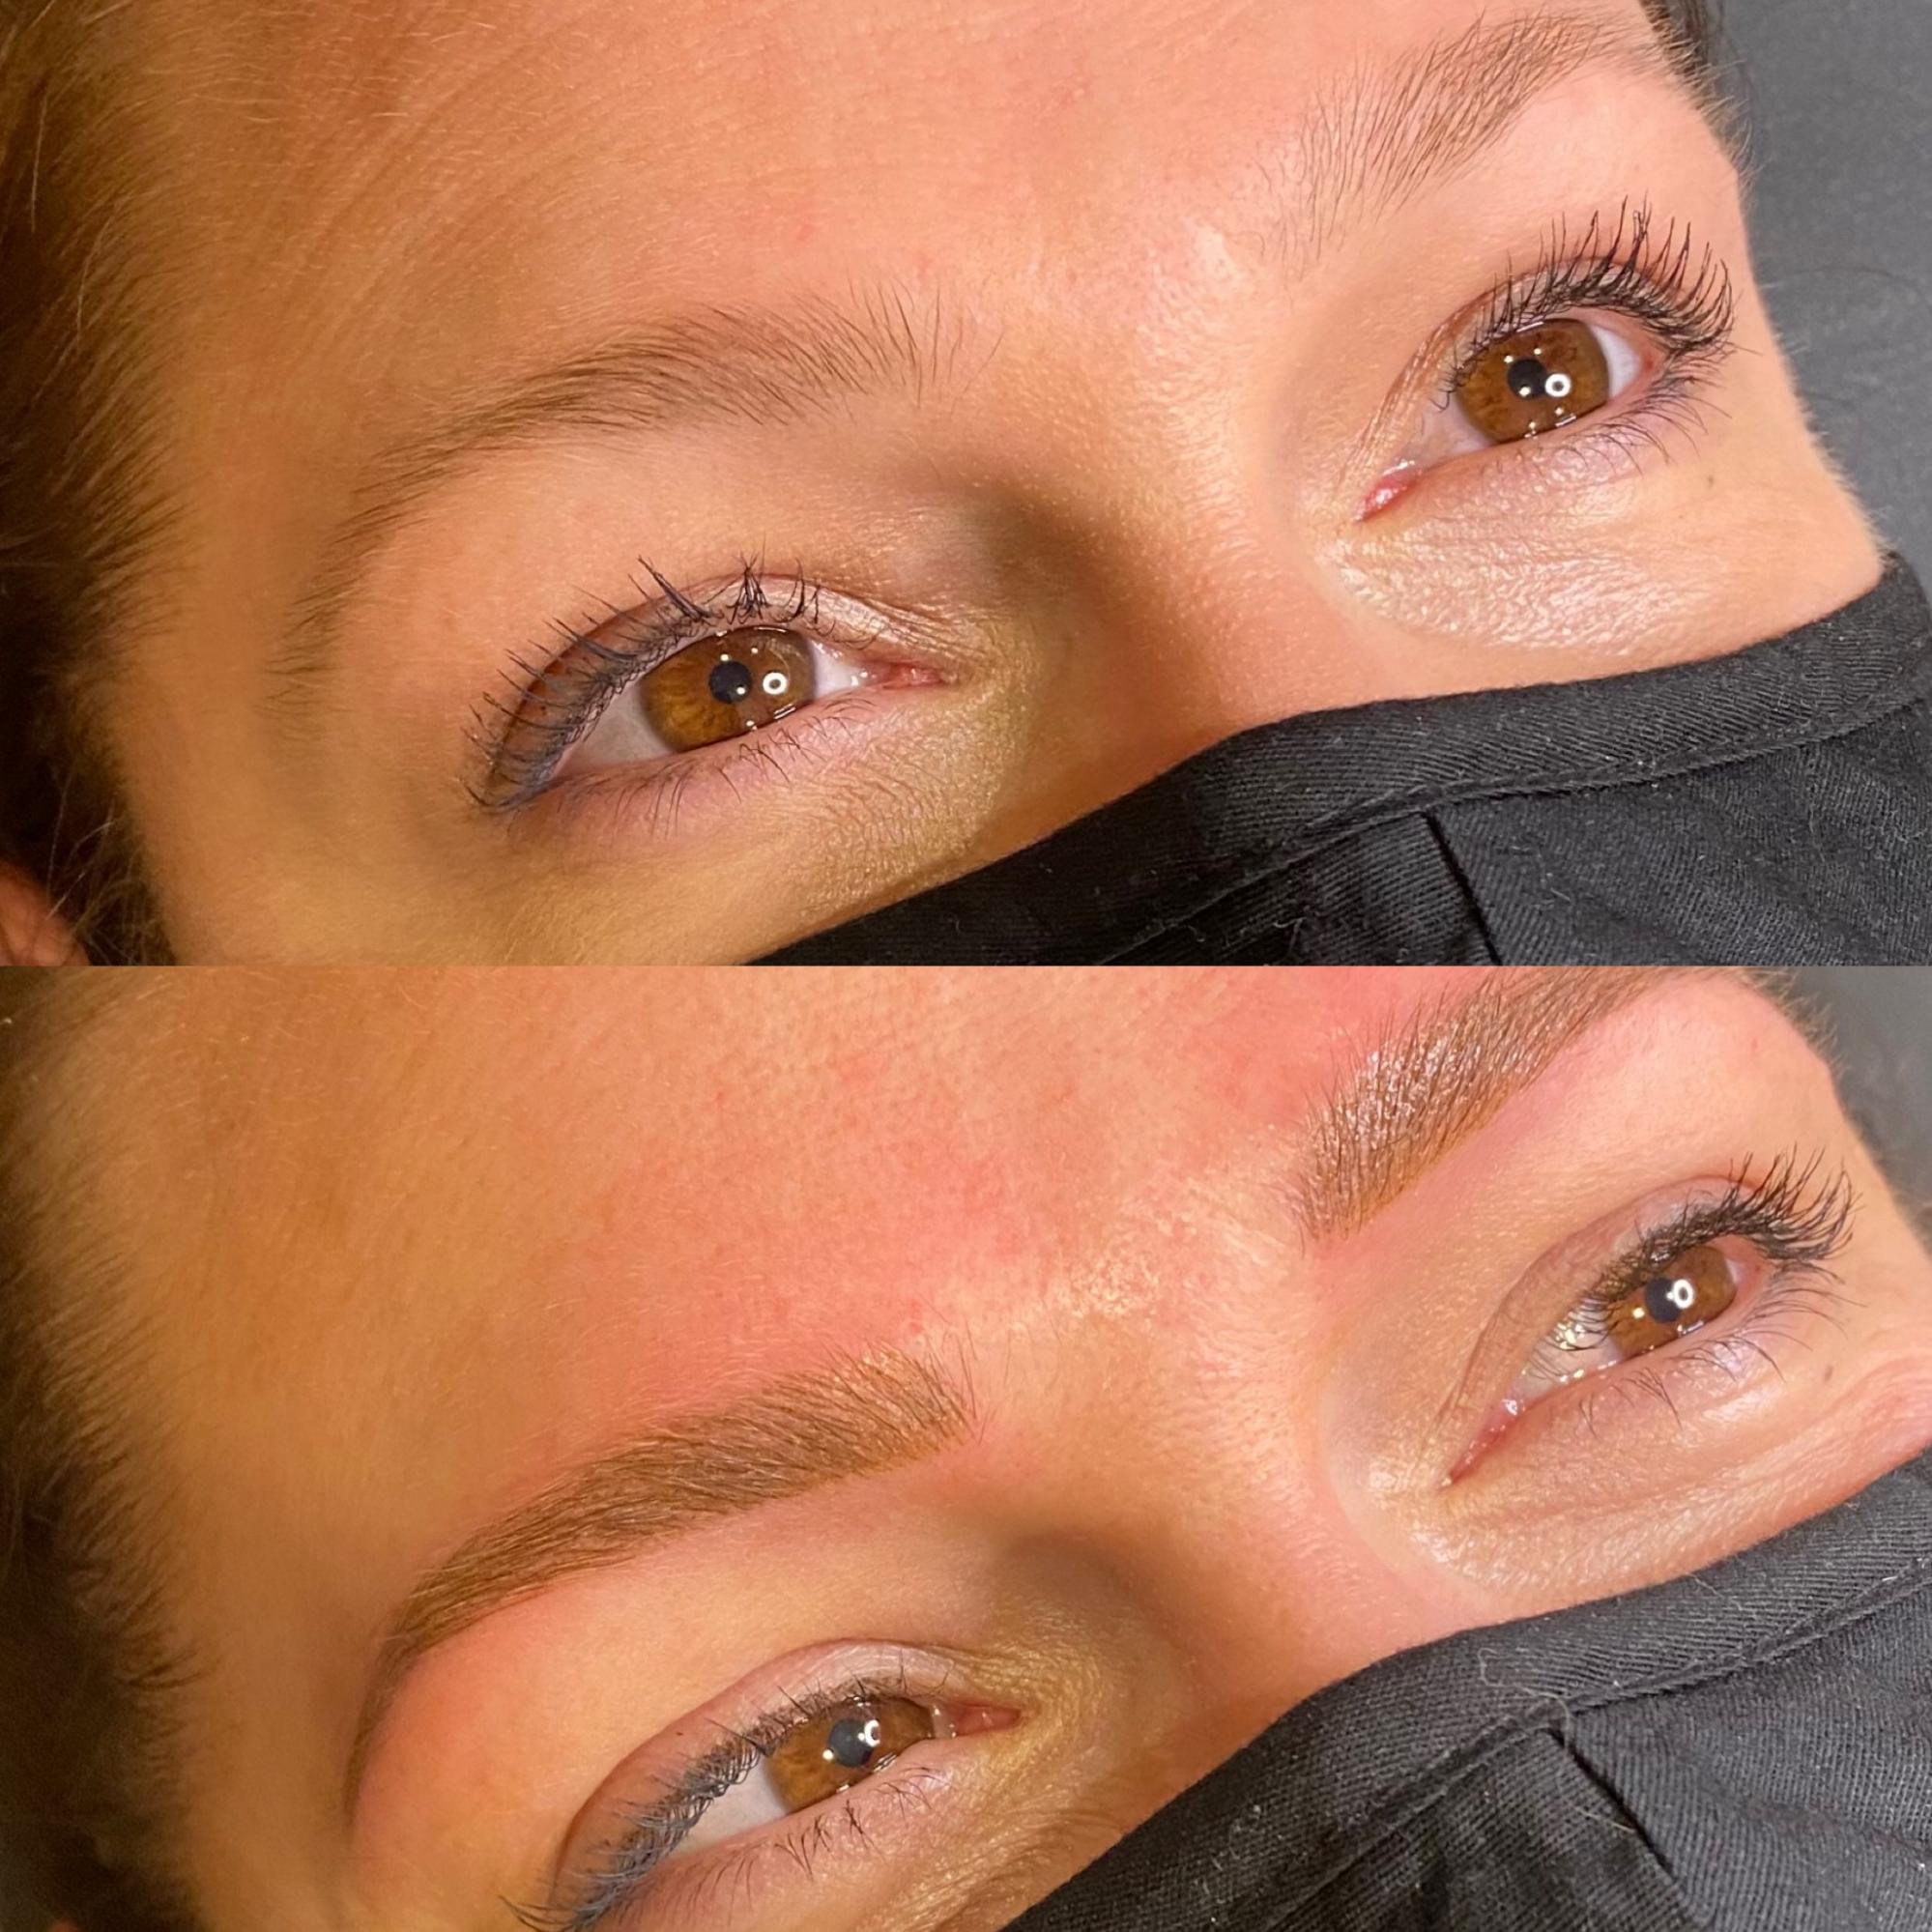 photo of eyebrows with microblading